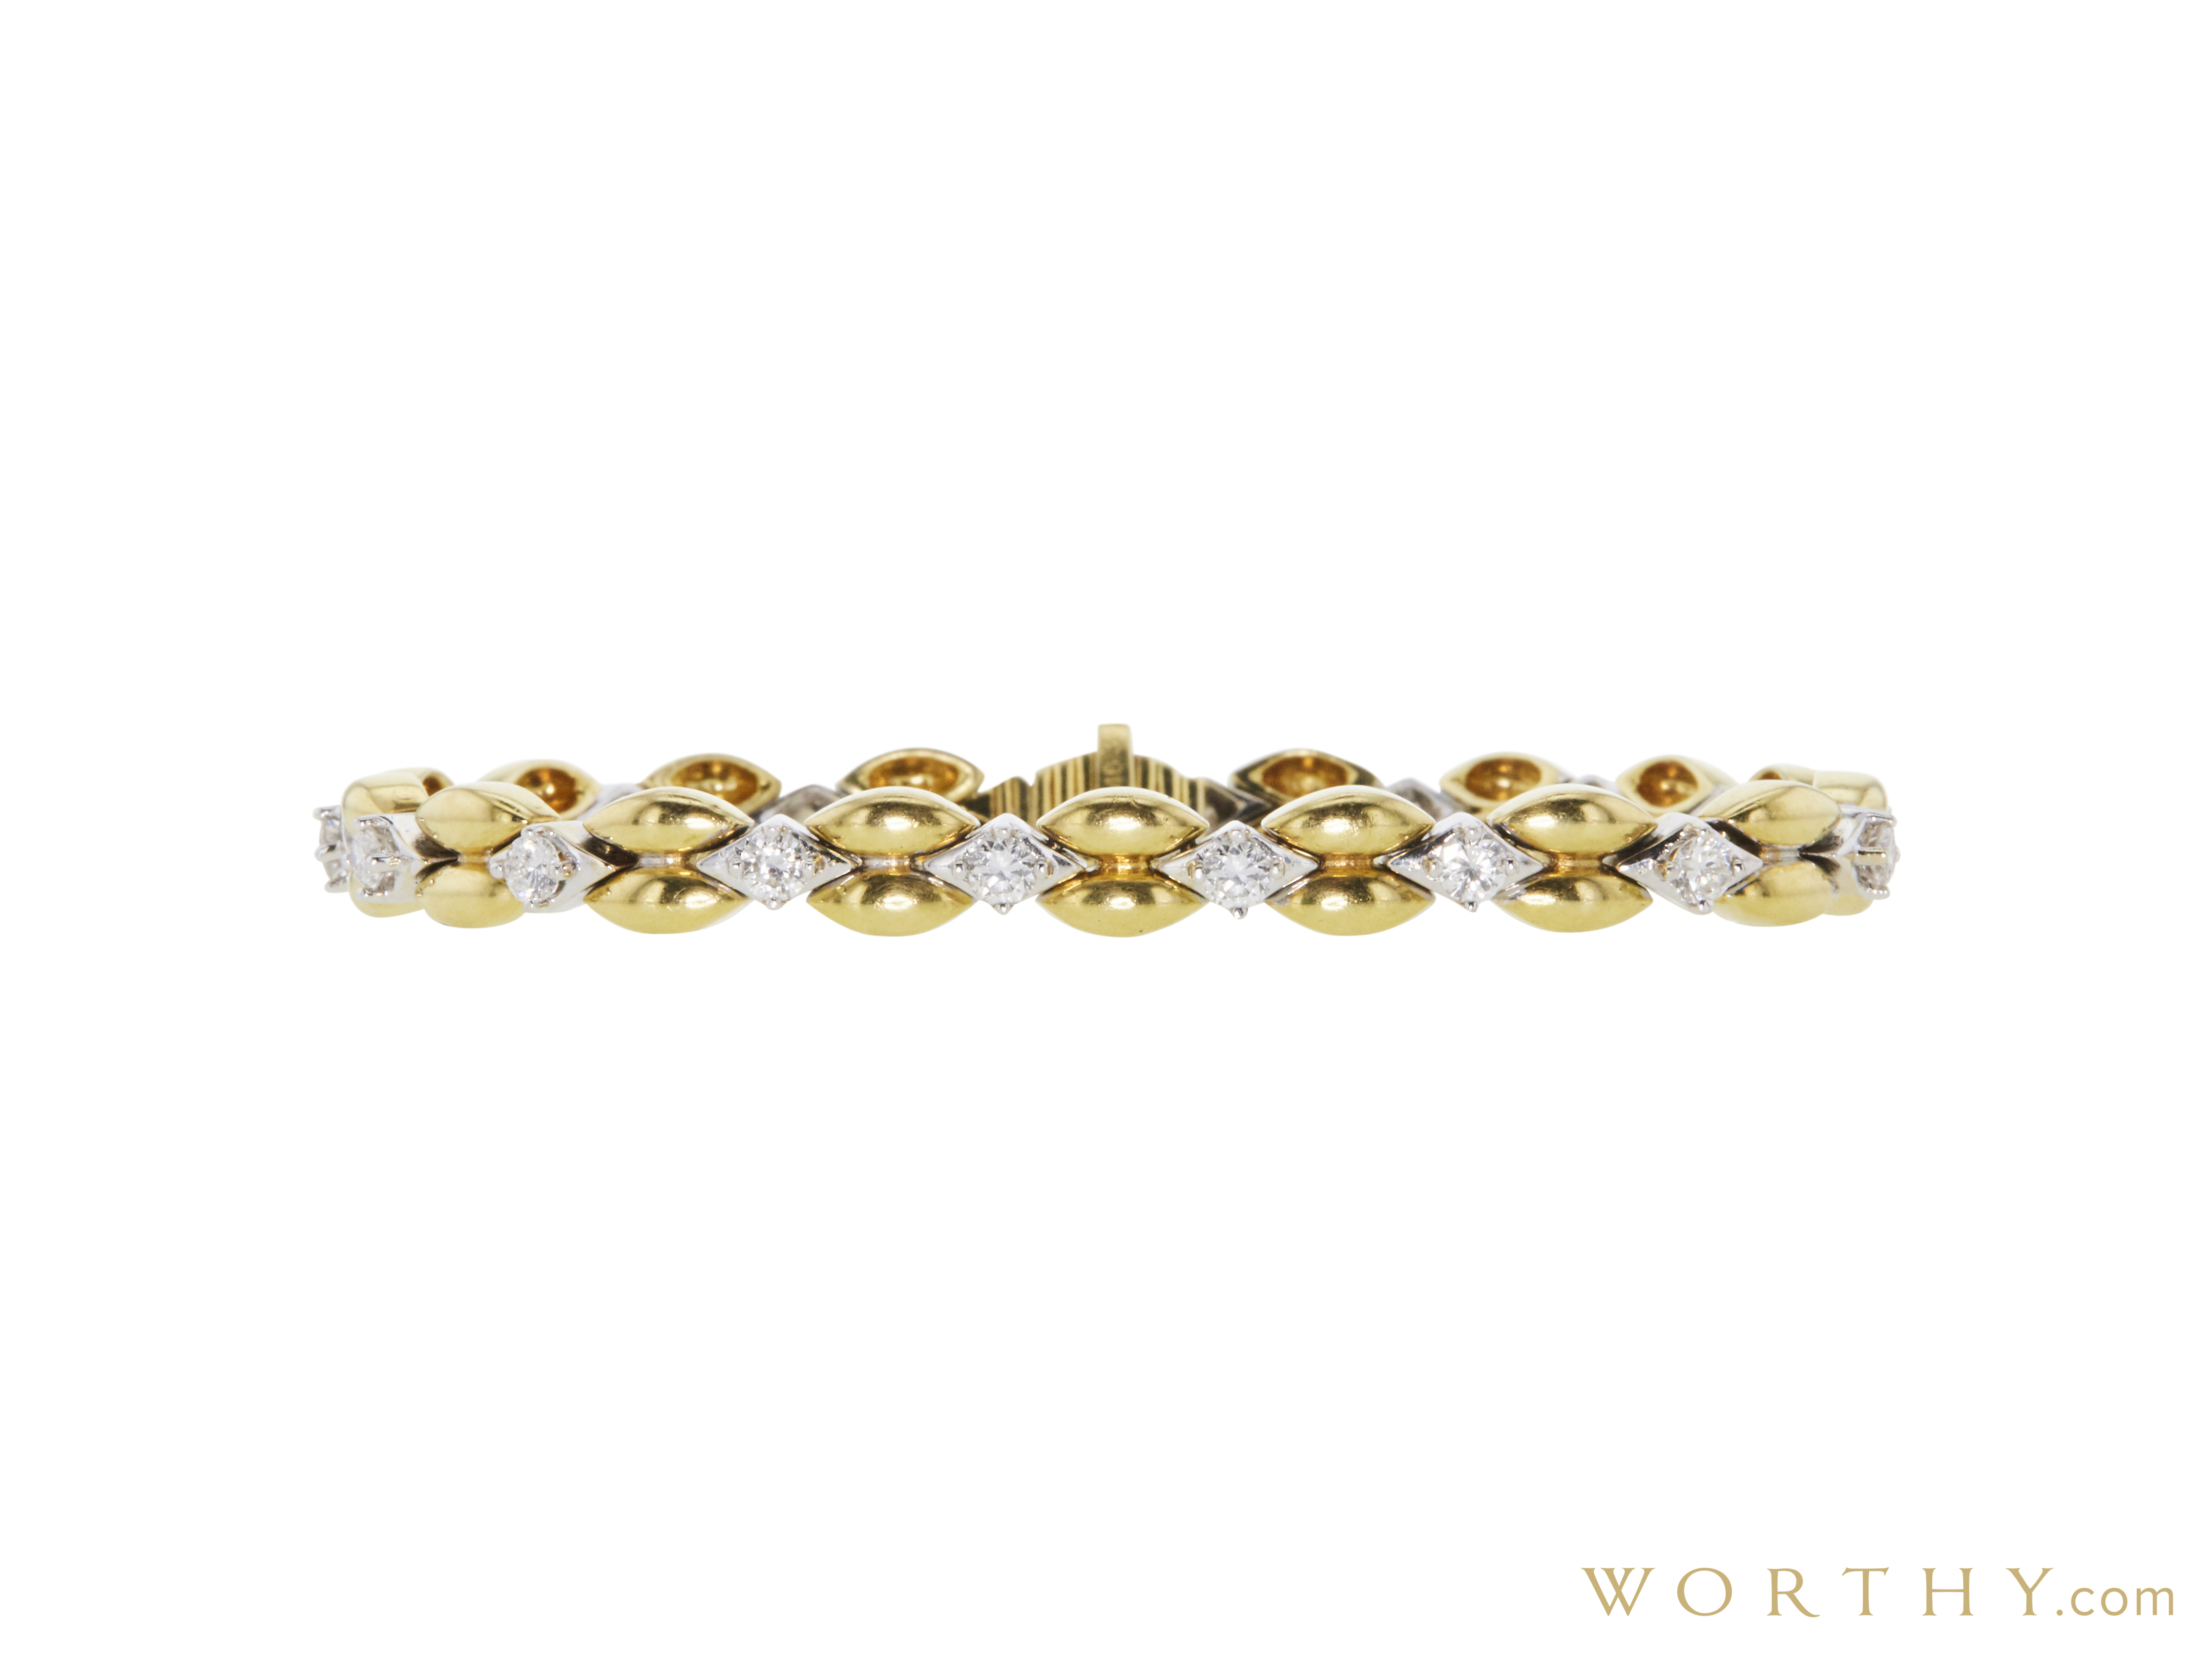 Two Tennis Bracelets | Sold For $2,984 | Worthy.com